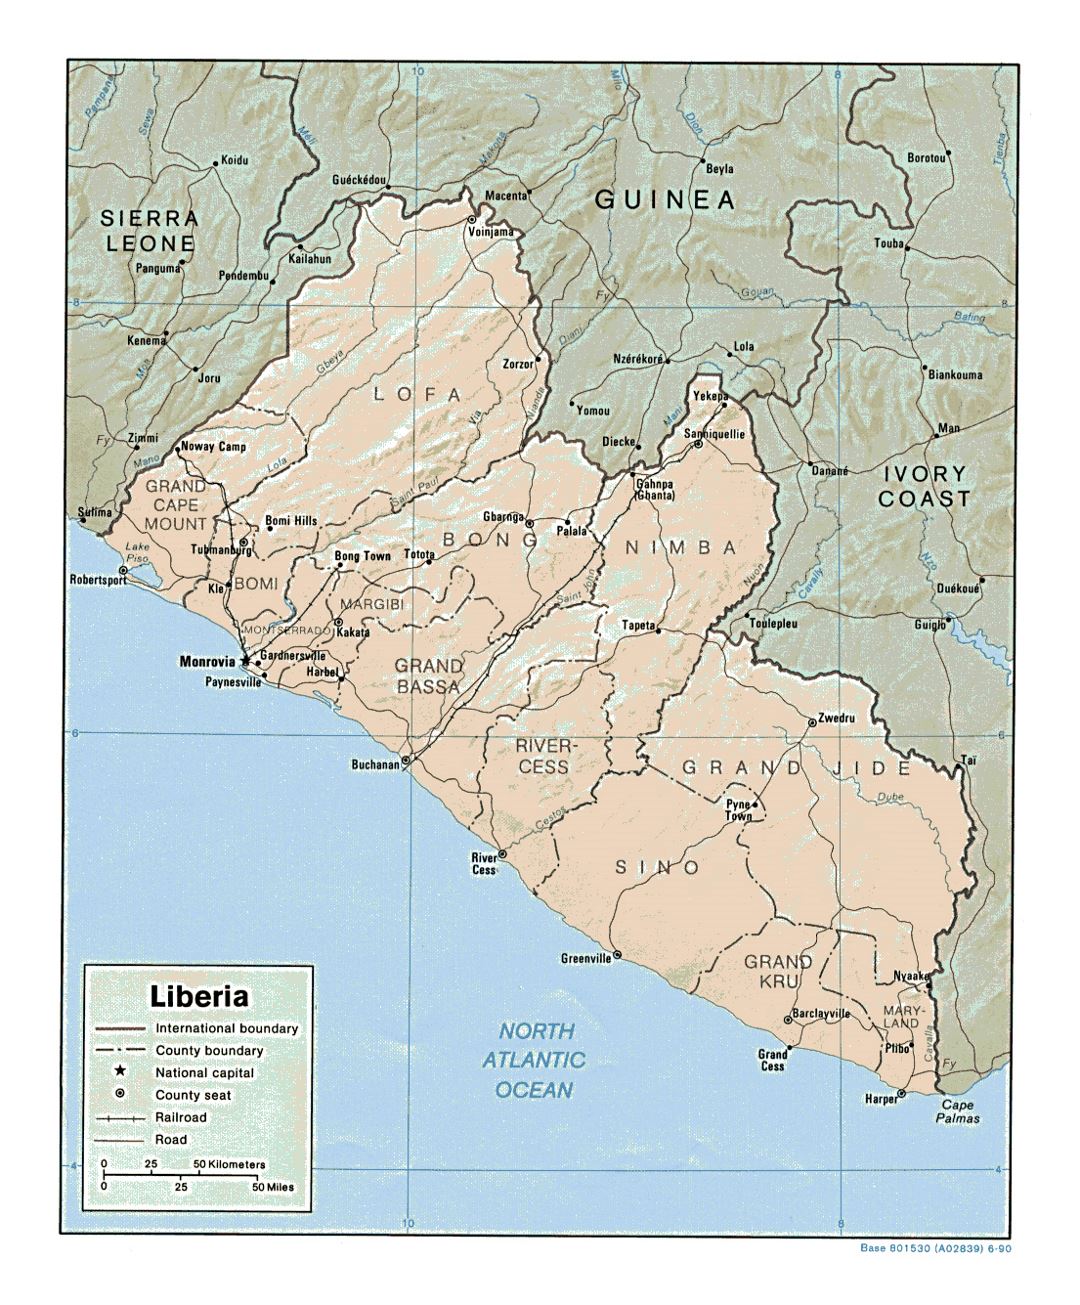 Detailed political and administrative map of Liberia with relief, roads, railroads and major cities - 1990